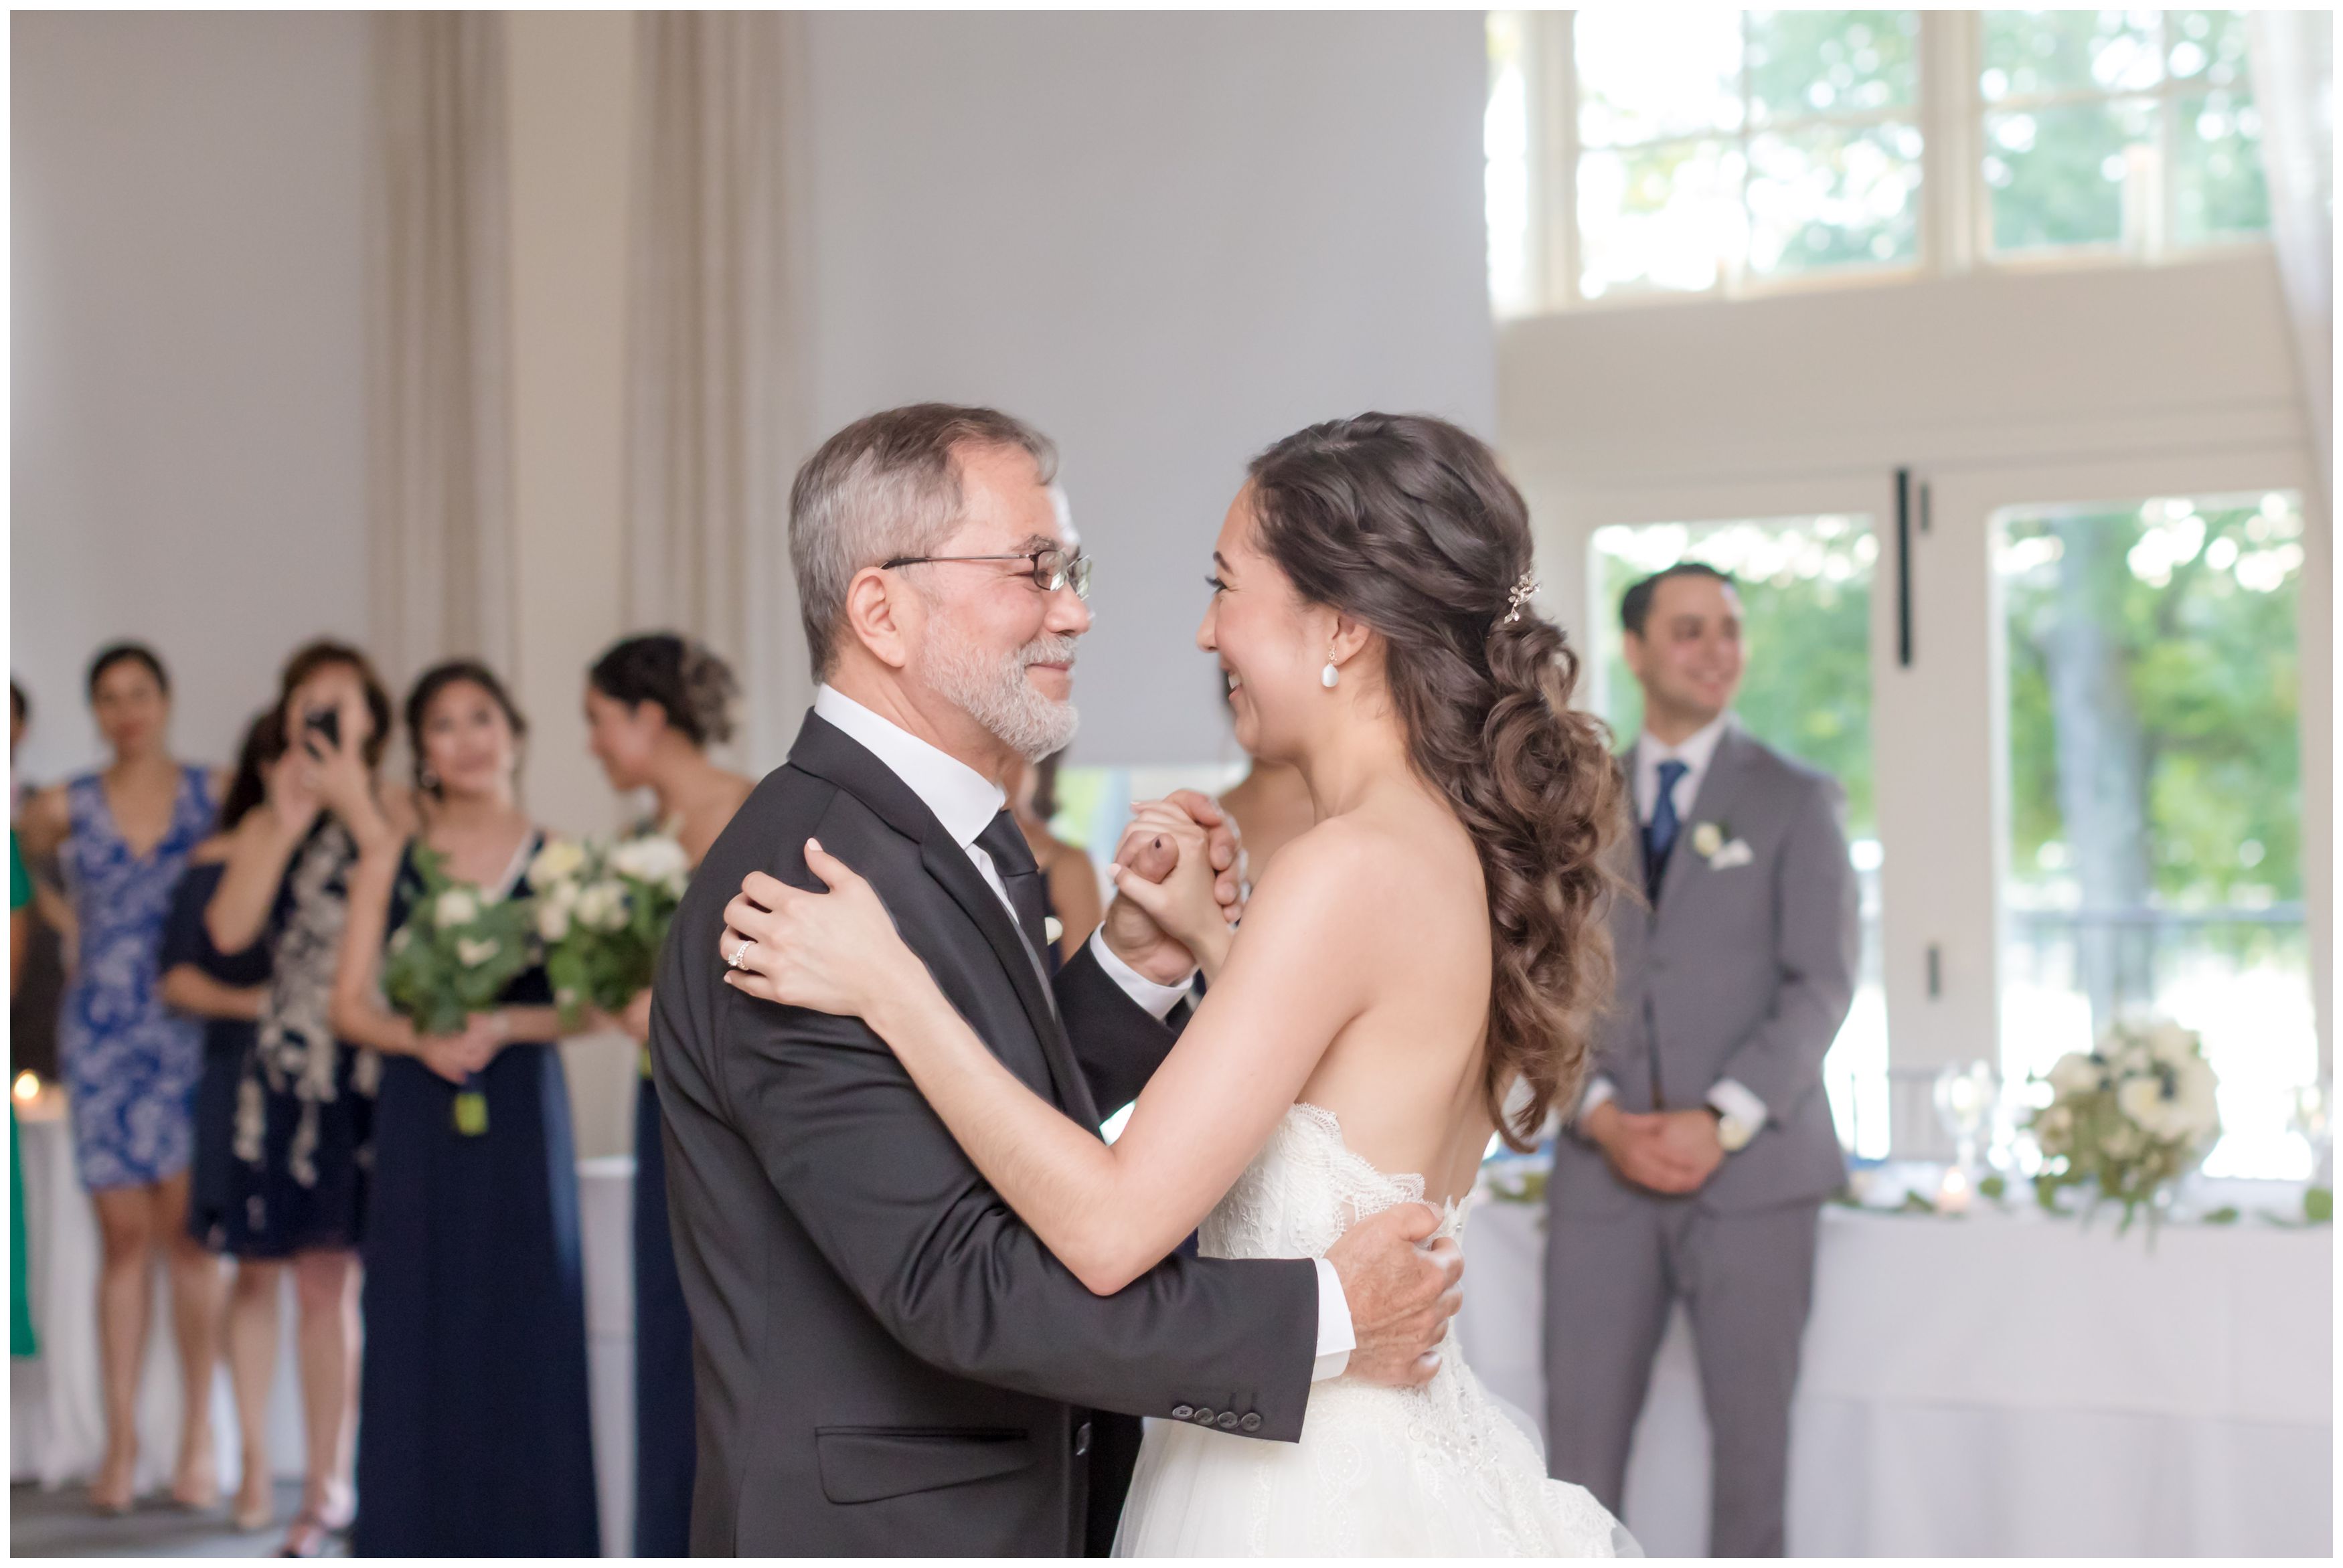 Father daughter dance wedding photo at the Indian Trail Club